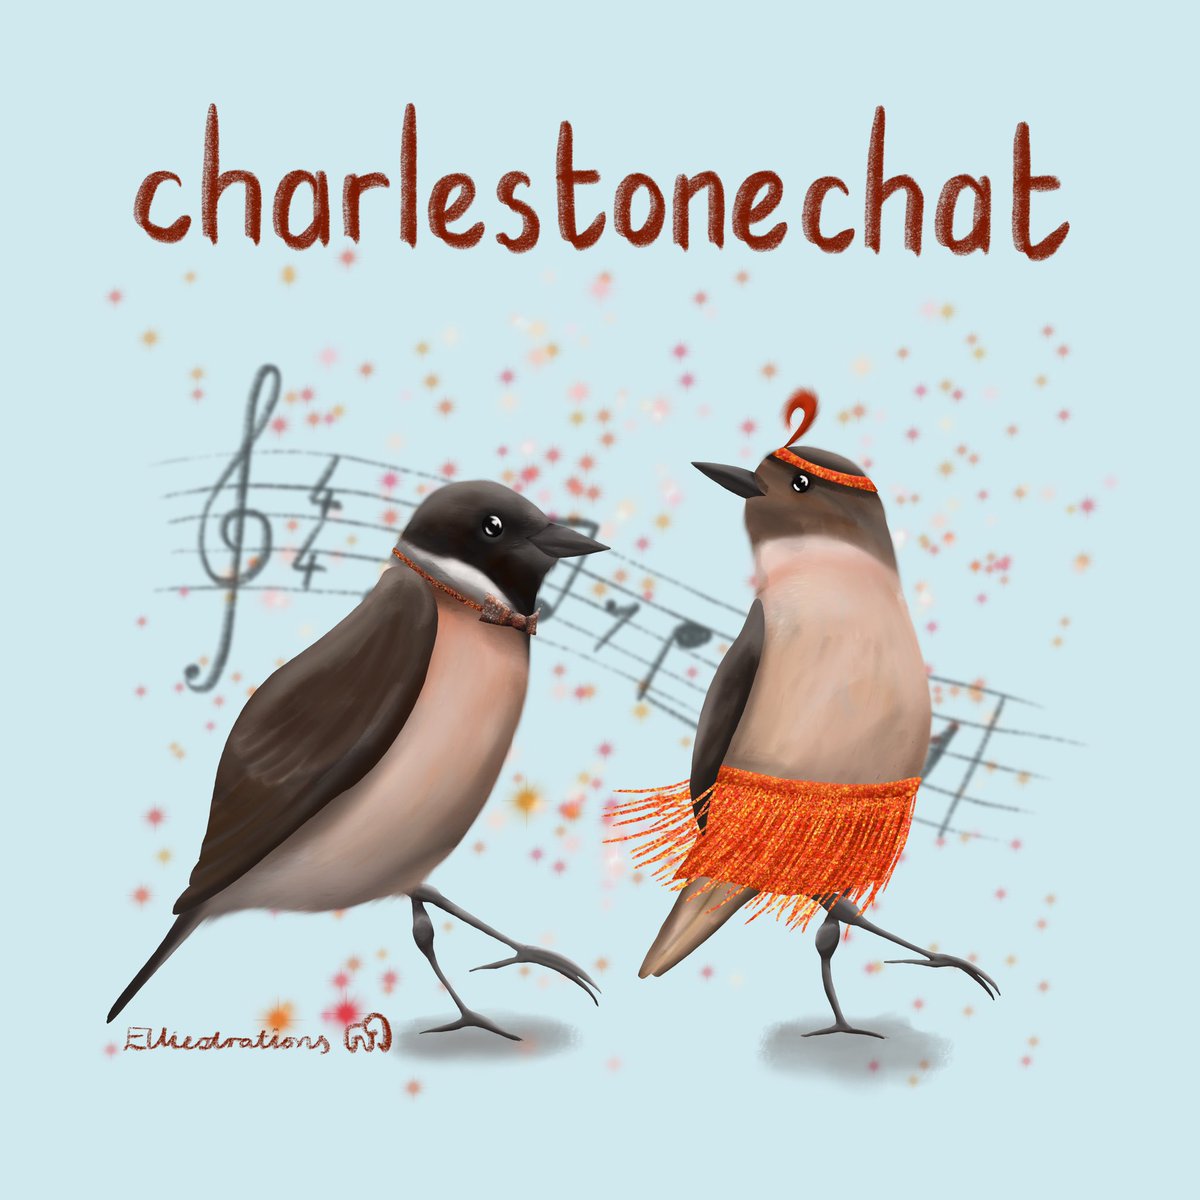 Finally a new illustration! Another dancing bird, this time the Charlestonechat. Often seen dancing on fence posts. #stonechat #birds #BirdTwitter #dancing #illustration